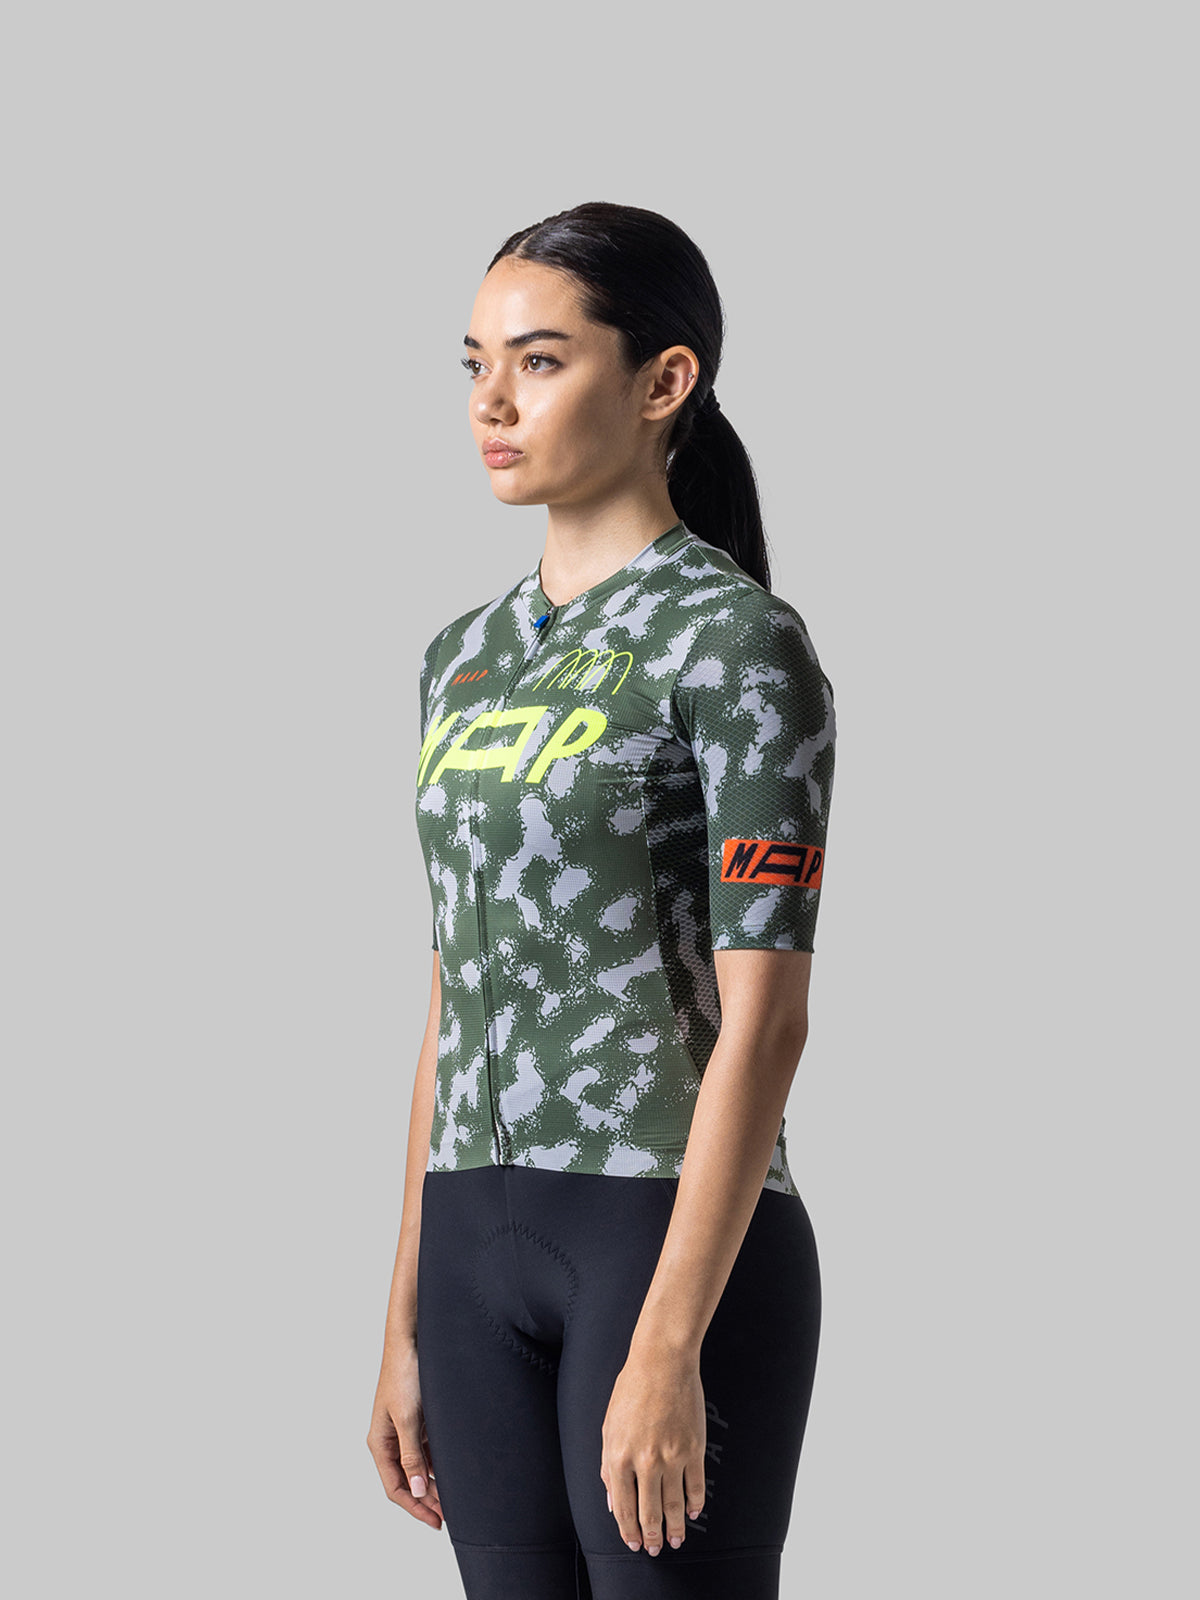 Women's Adapted I.S Pro Air Jersey